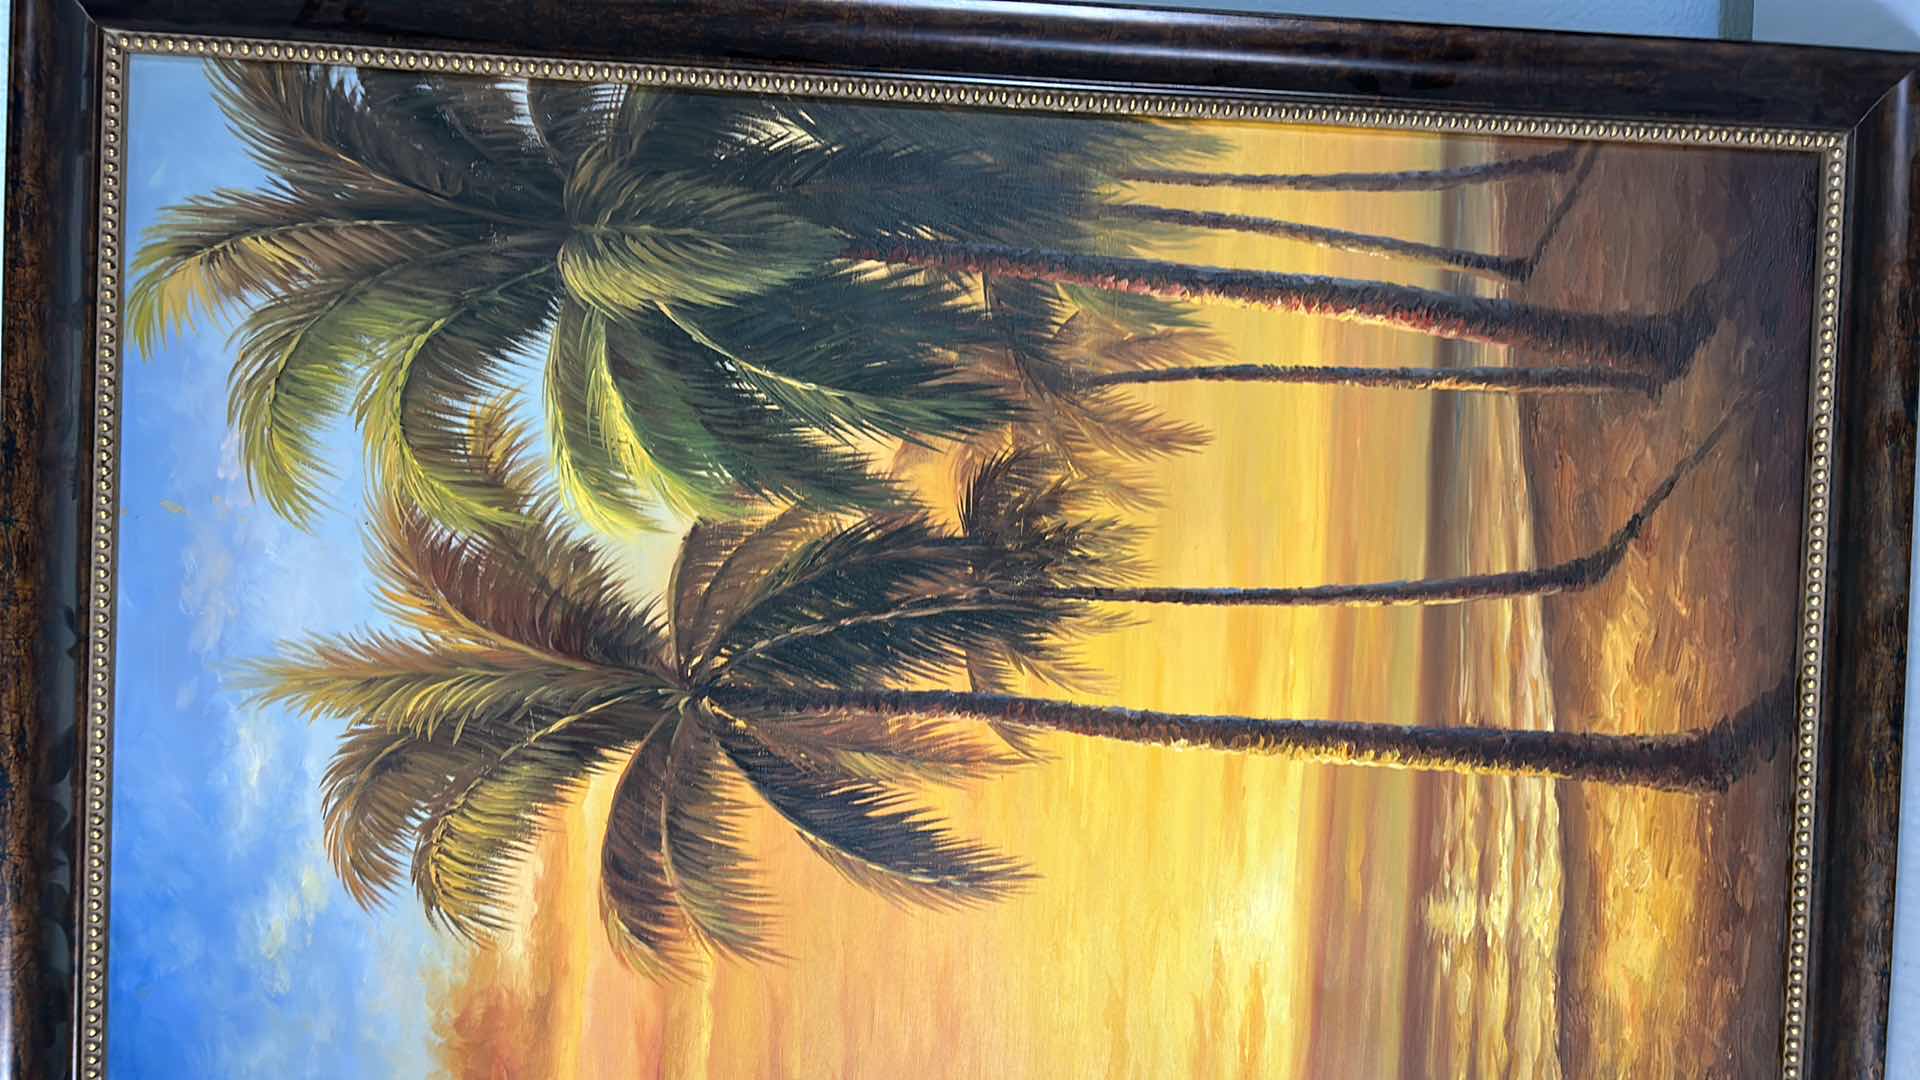 Photo 2 of OIL ON CANVAS, PALM TREES, FRAMED ARTWORK